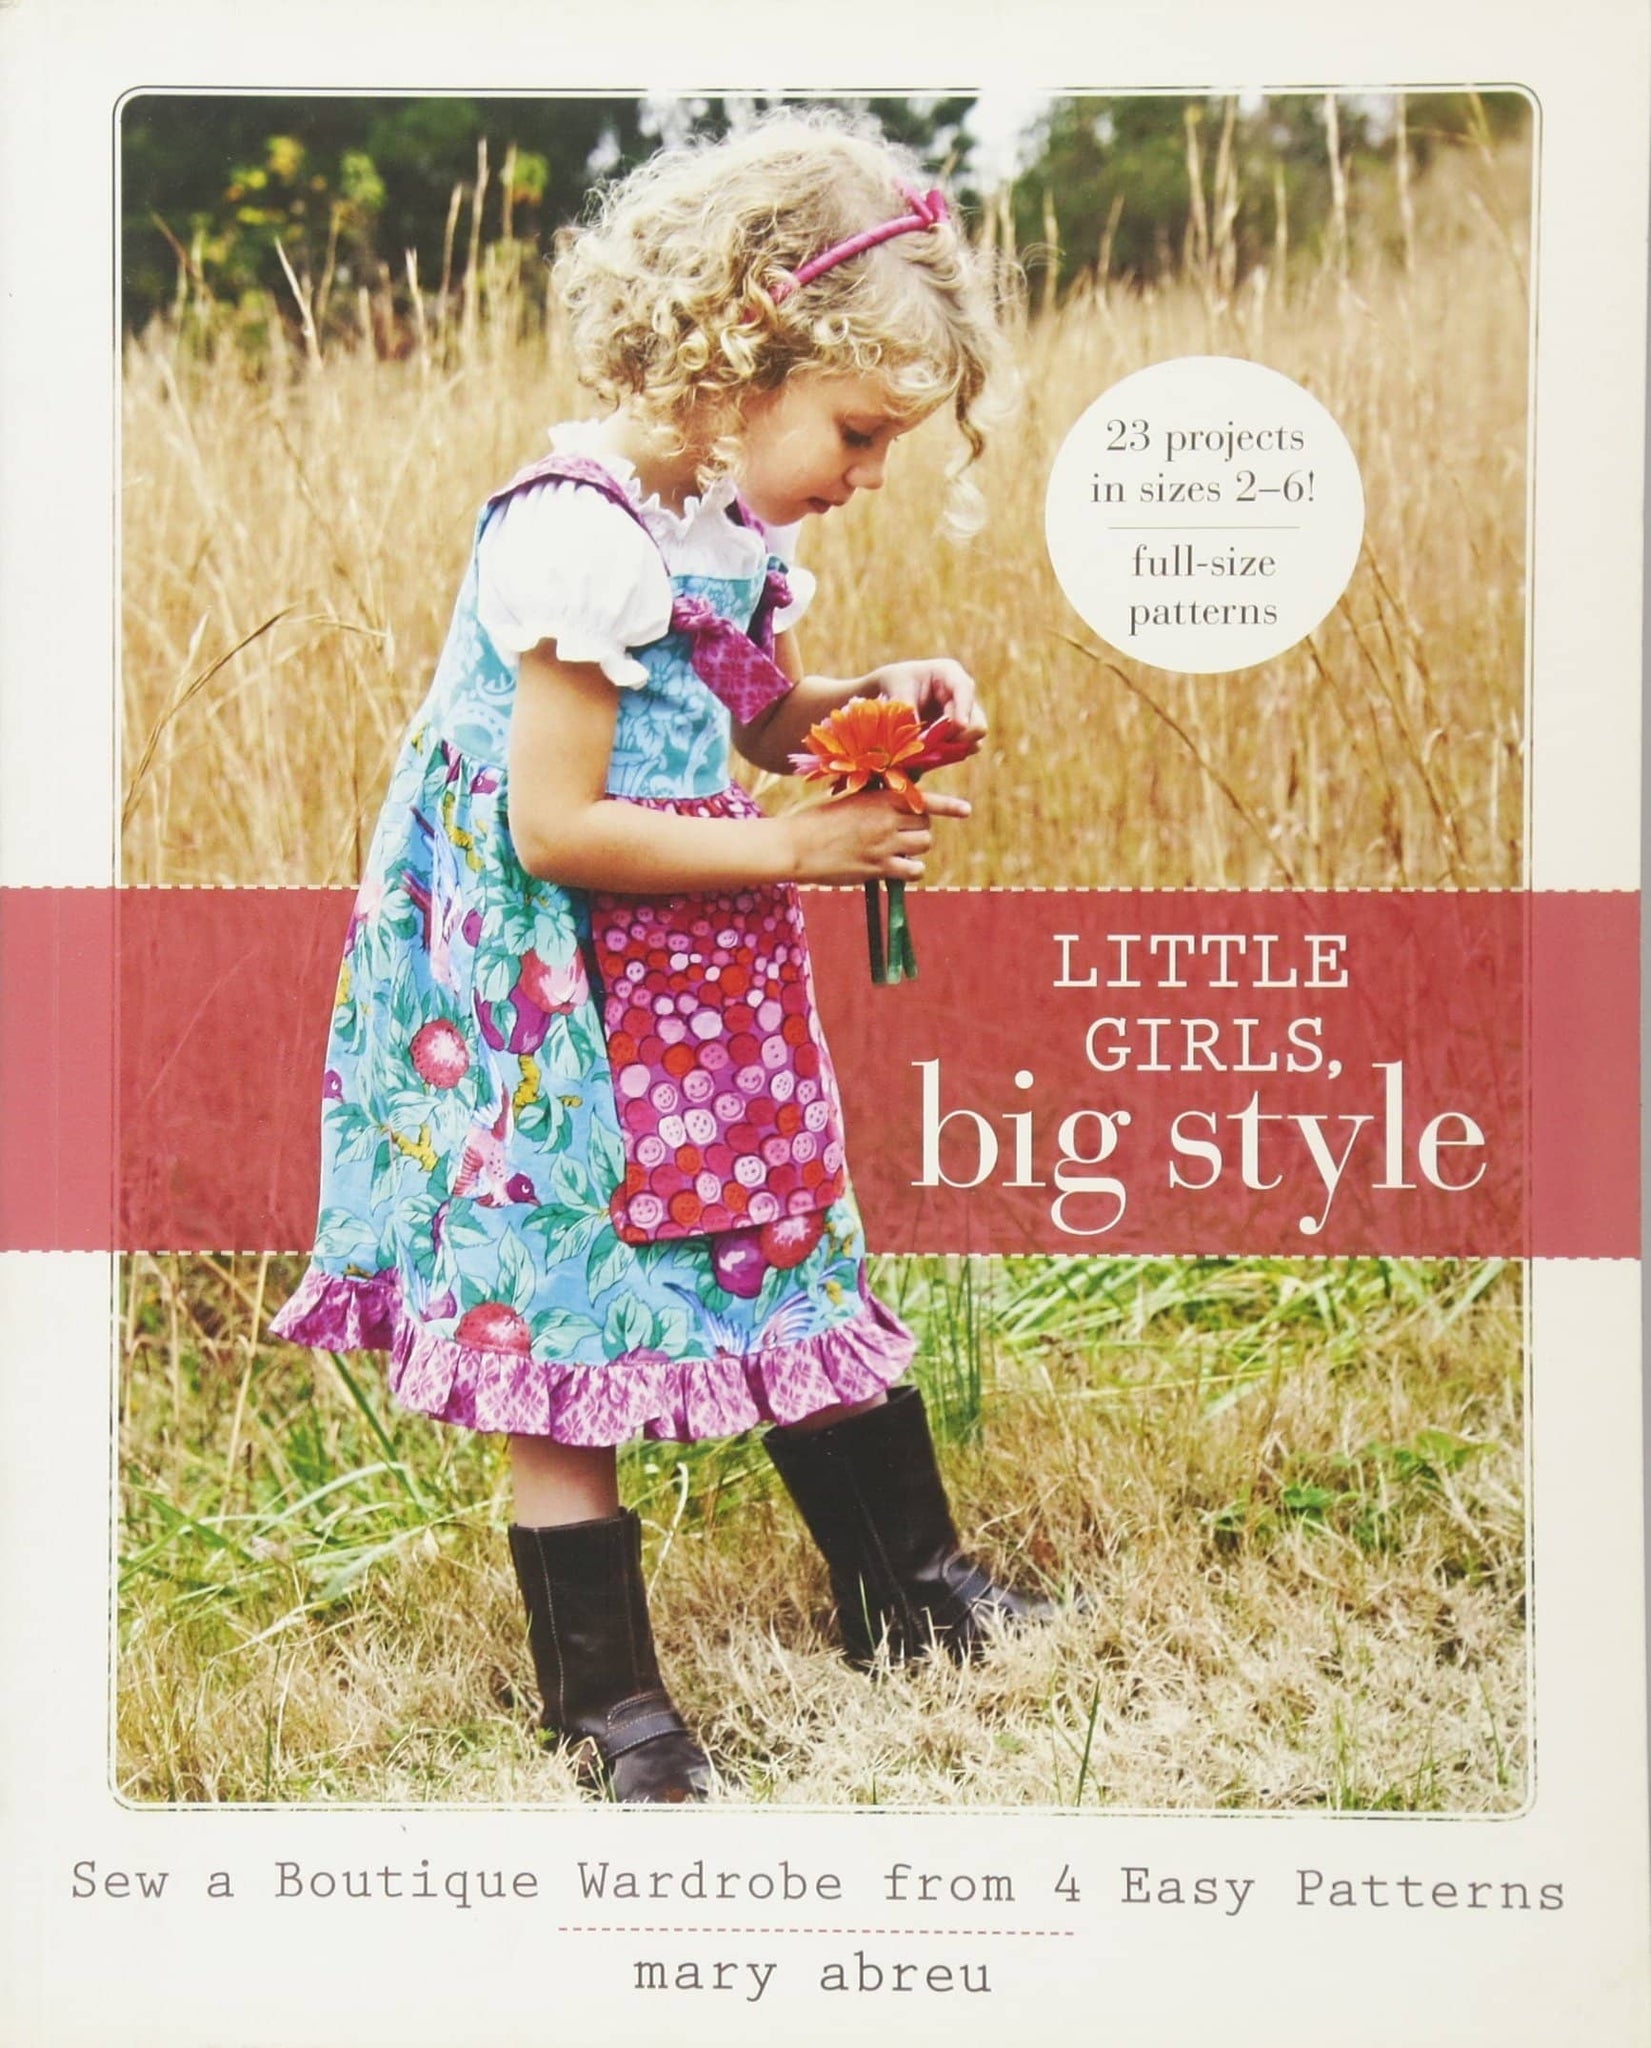 Little Girls Big Style: Sew A Boutique Wardrobe From 4 Easy Patterns (Book)-Kidding Around NYC